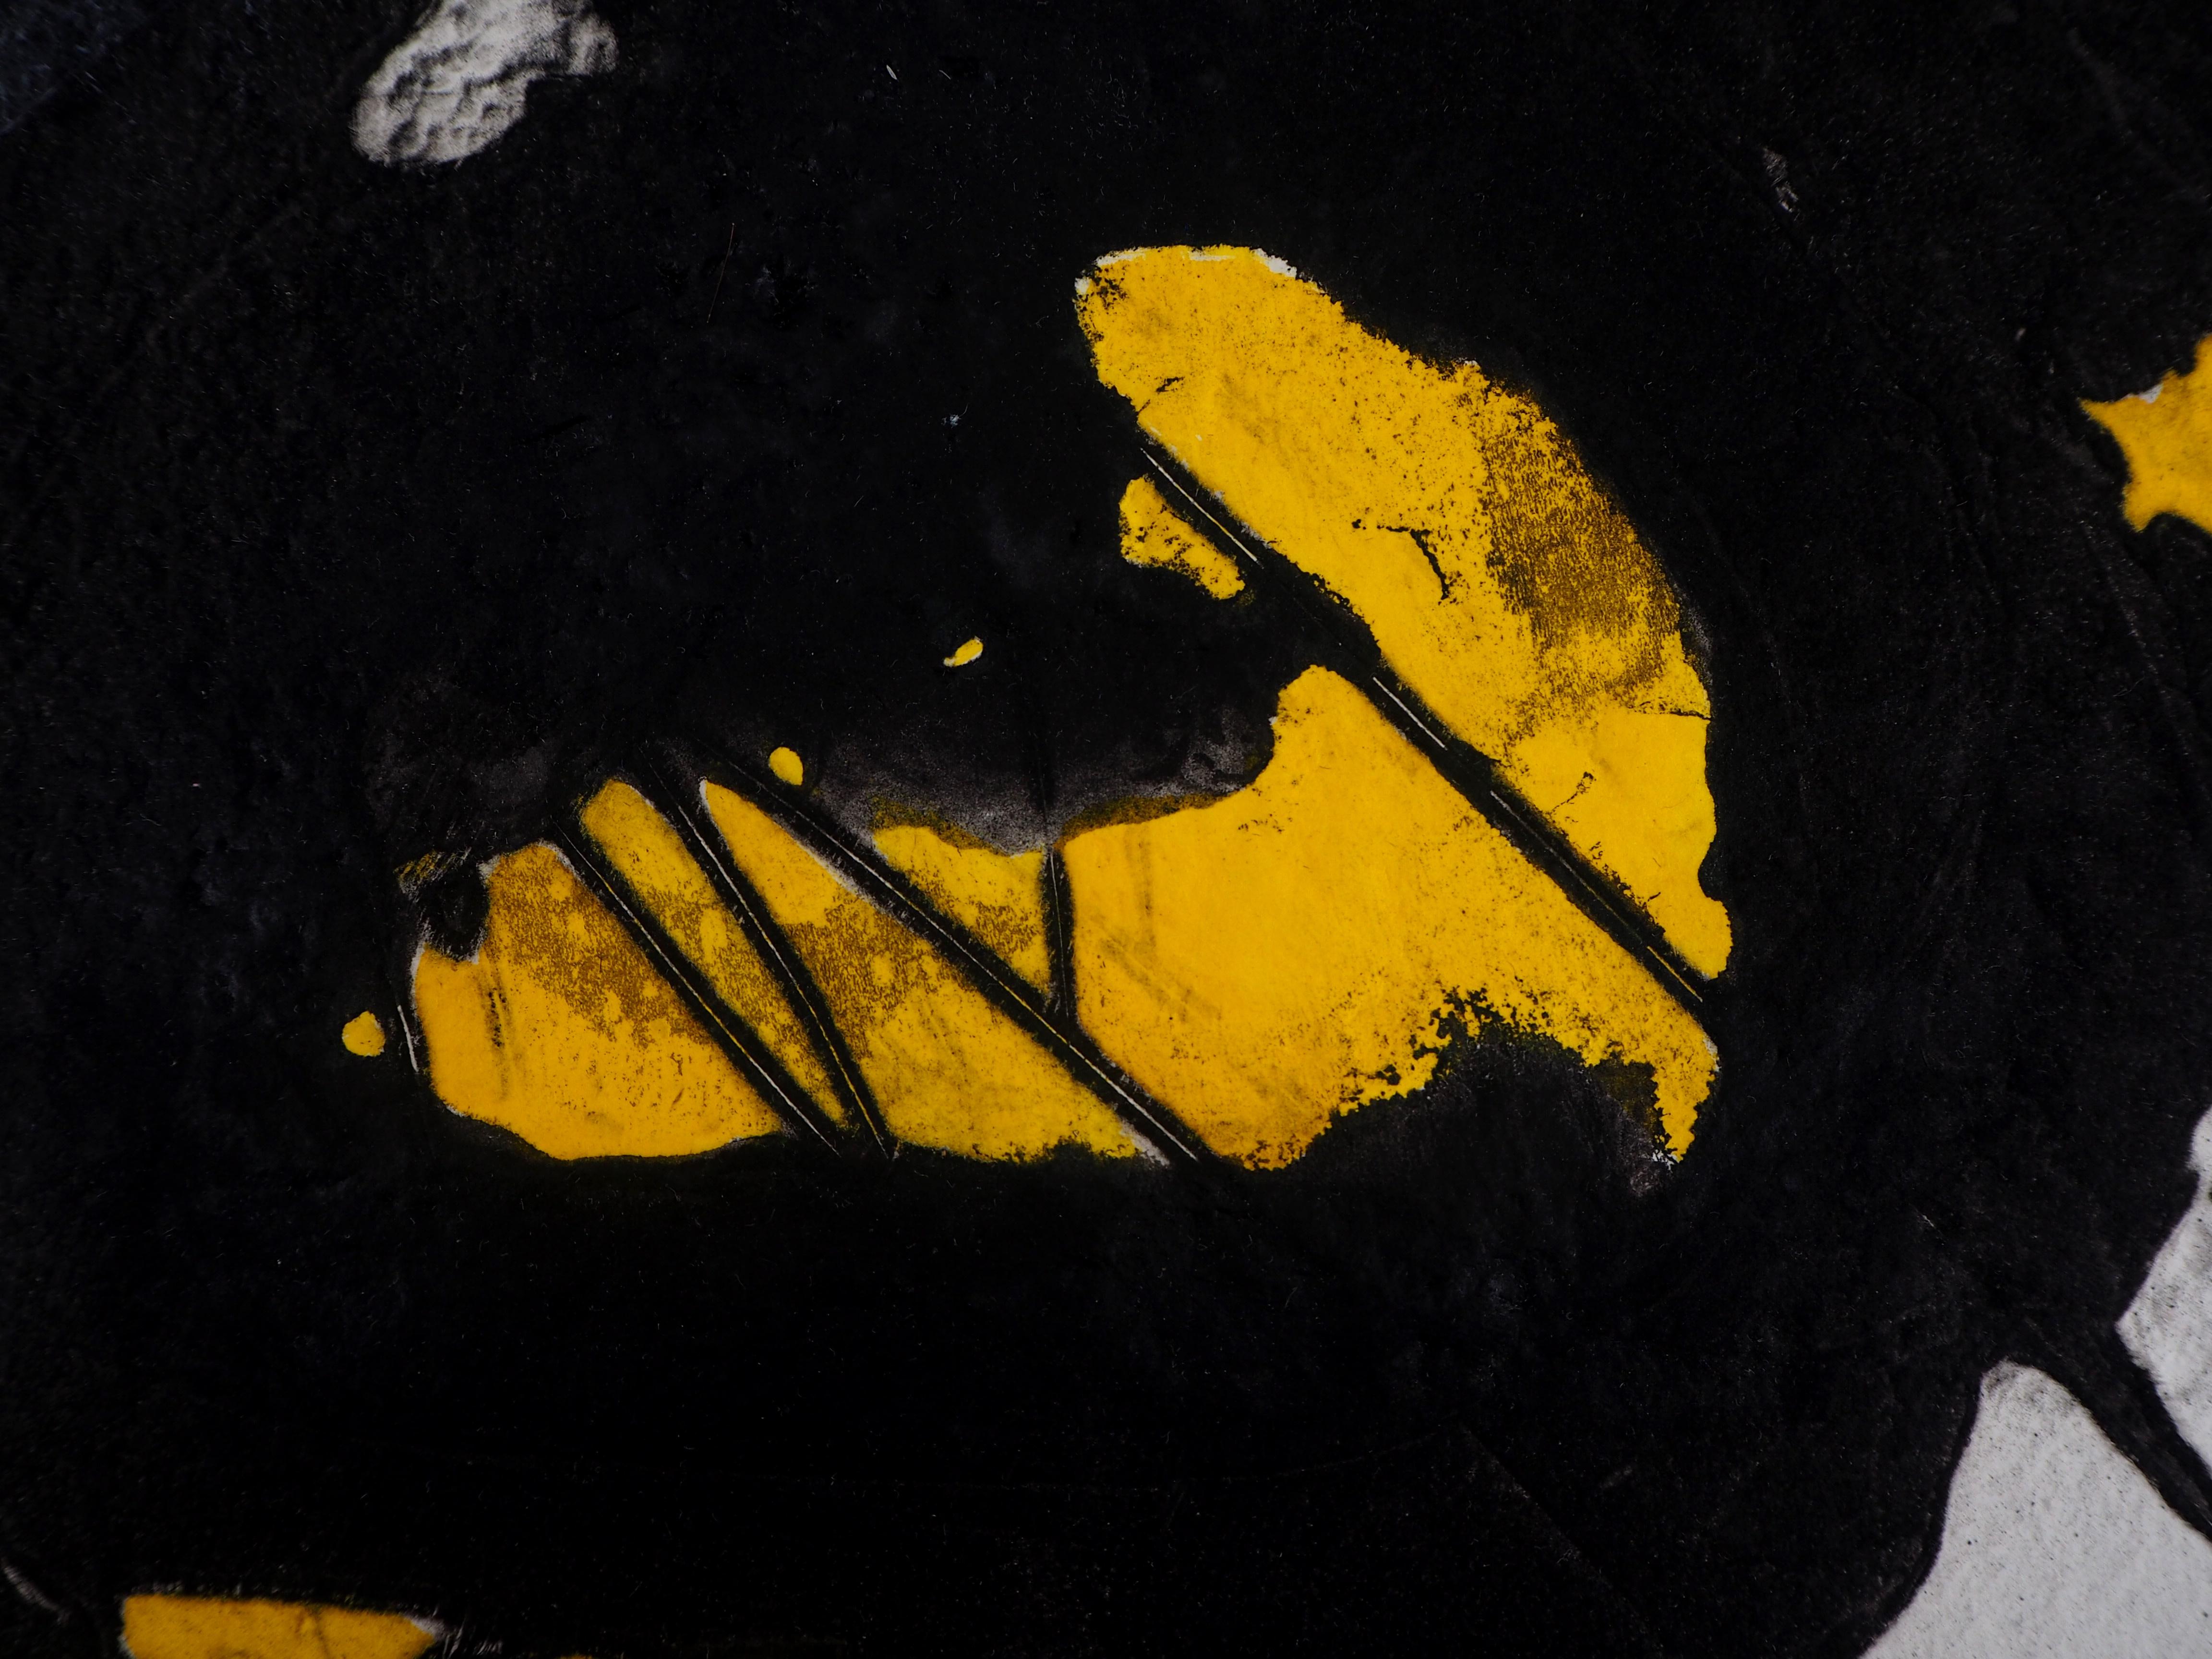 LIONEL (Lionel PEROTTE, said)
Abstract Composition with Yellow and Black

Original carborundum etching enhanced by the artist with highlights of hand painting 
Handsigned in pencil
Numbered /20
On Vellum 46.5 x 58cm (c. 18.1 x 22.8